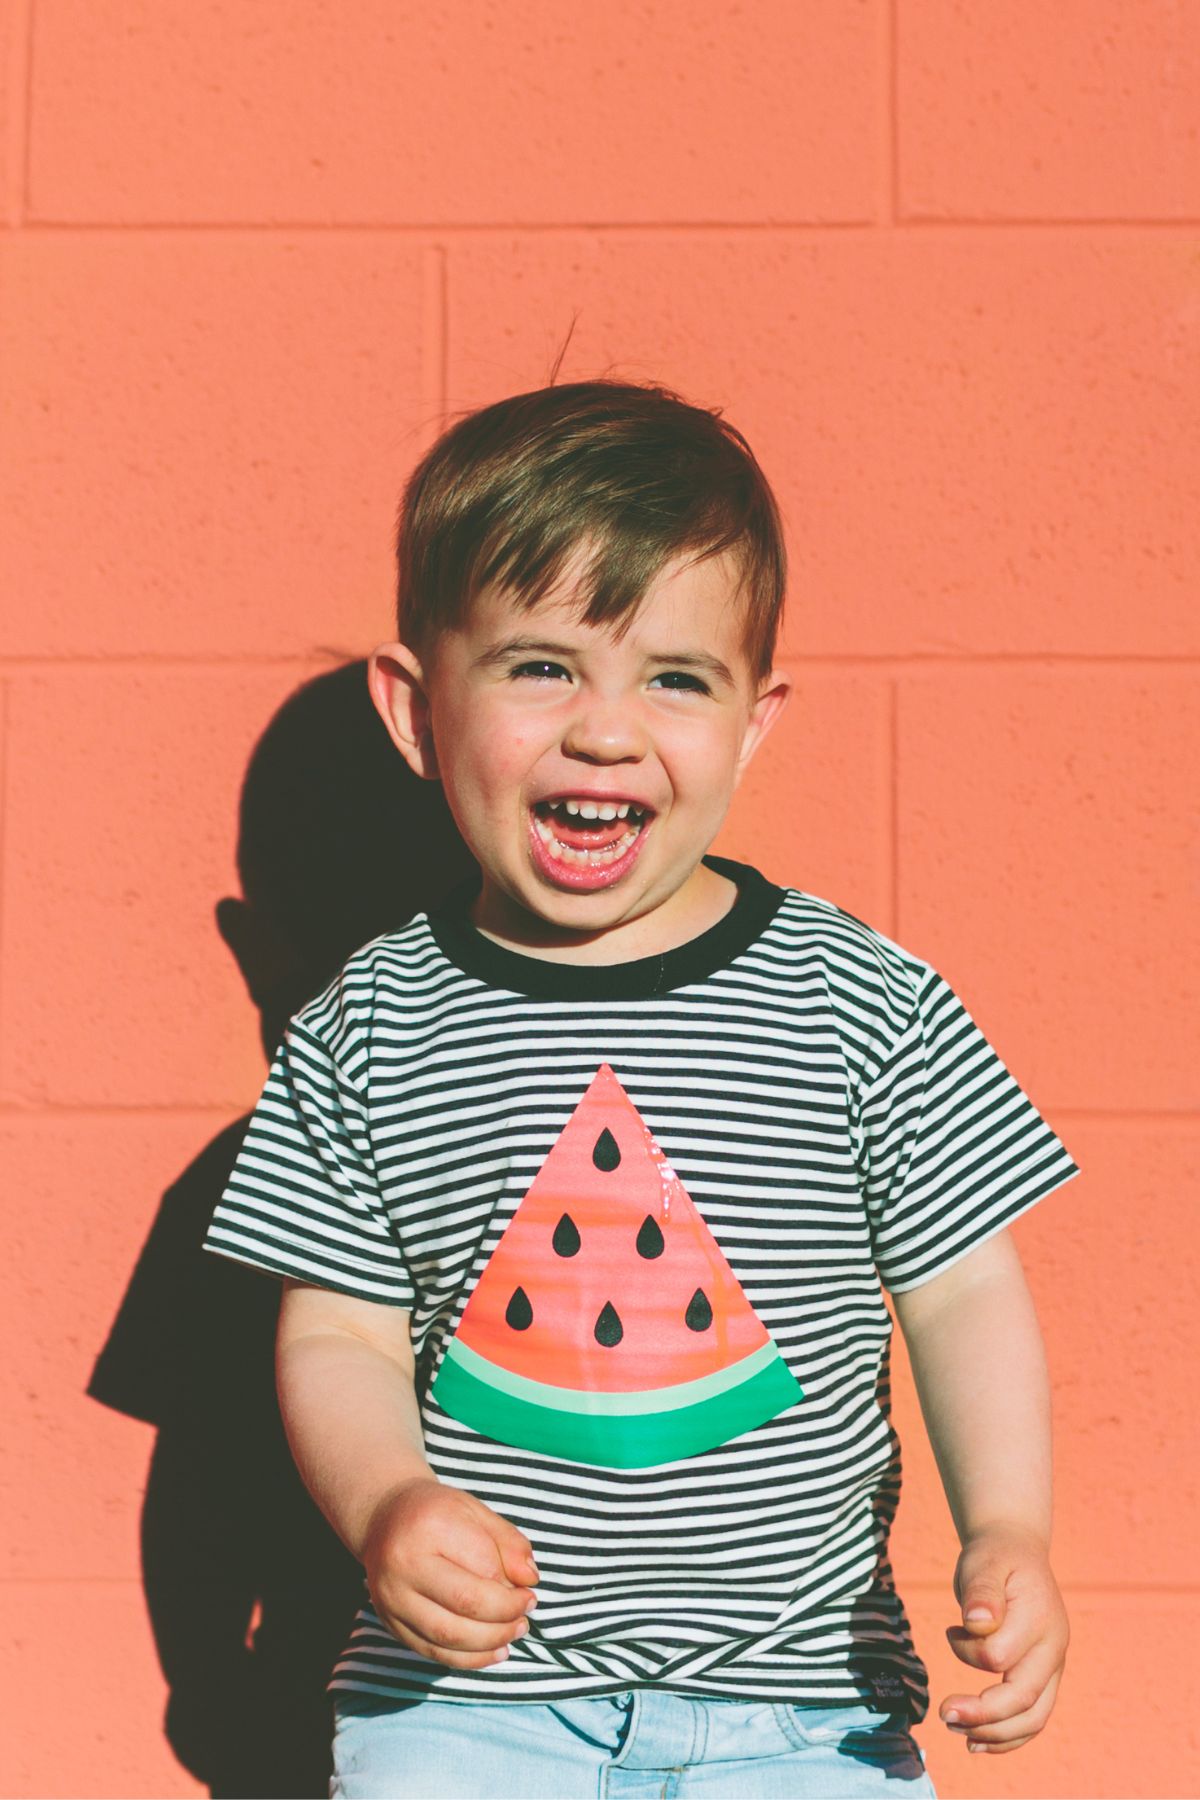 A boy with a watermelon shirt on laughing stands in front of an orange brick wall.